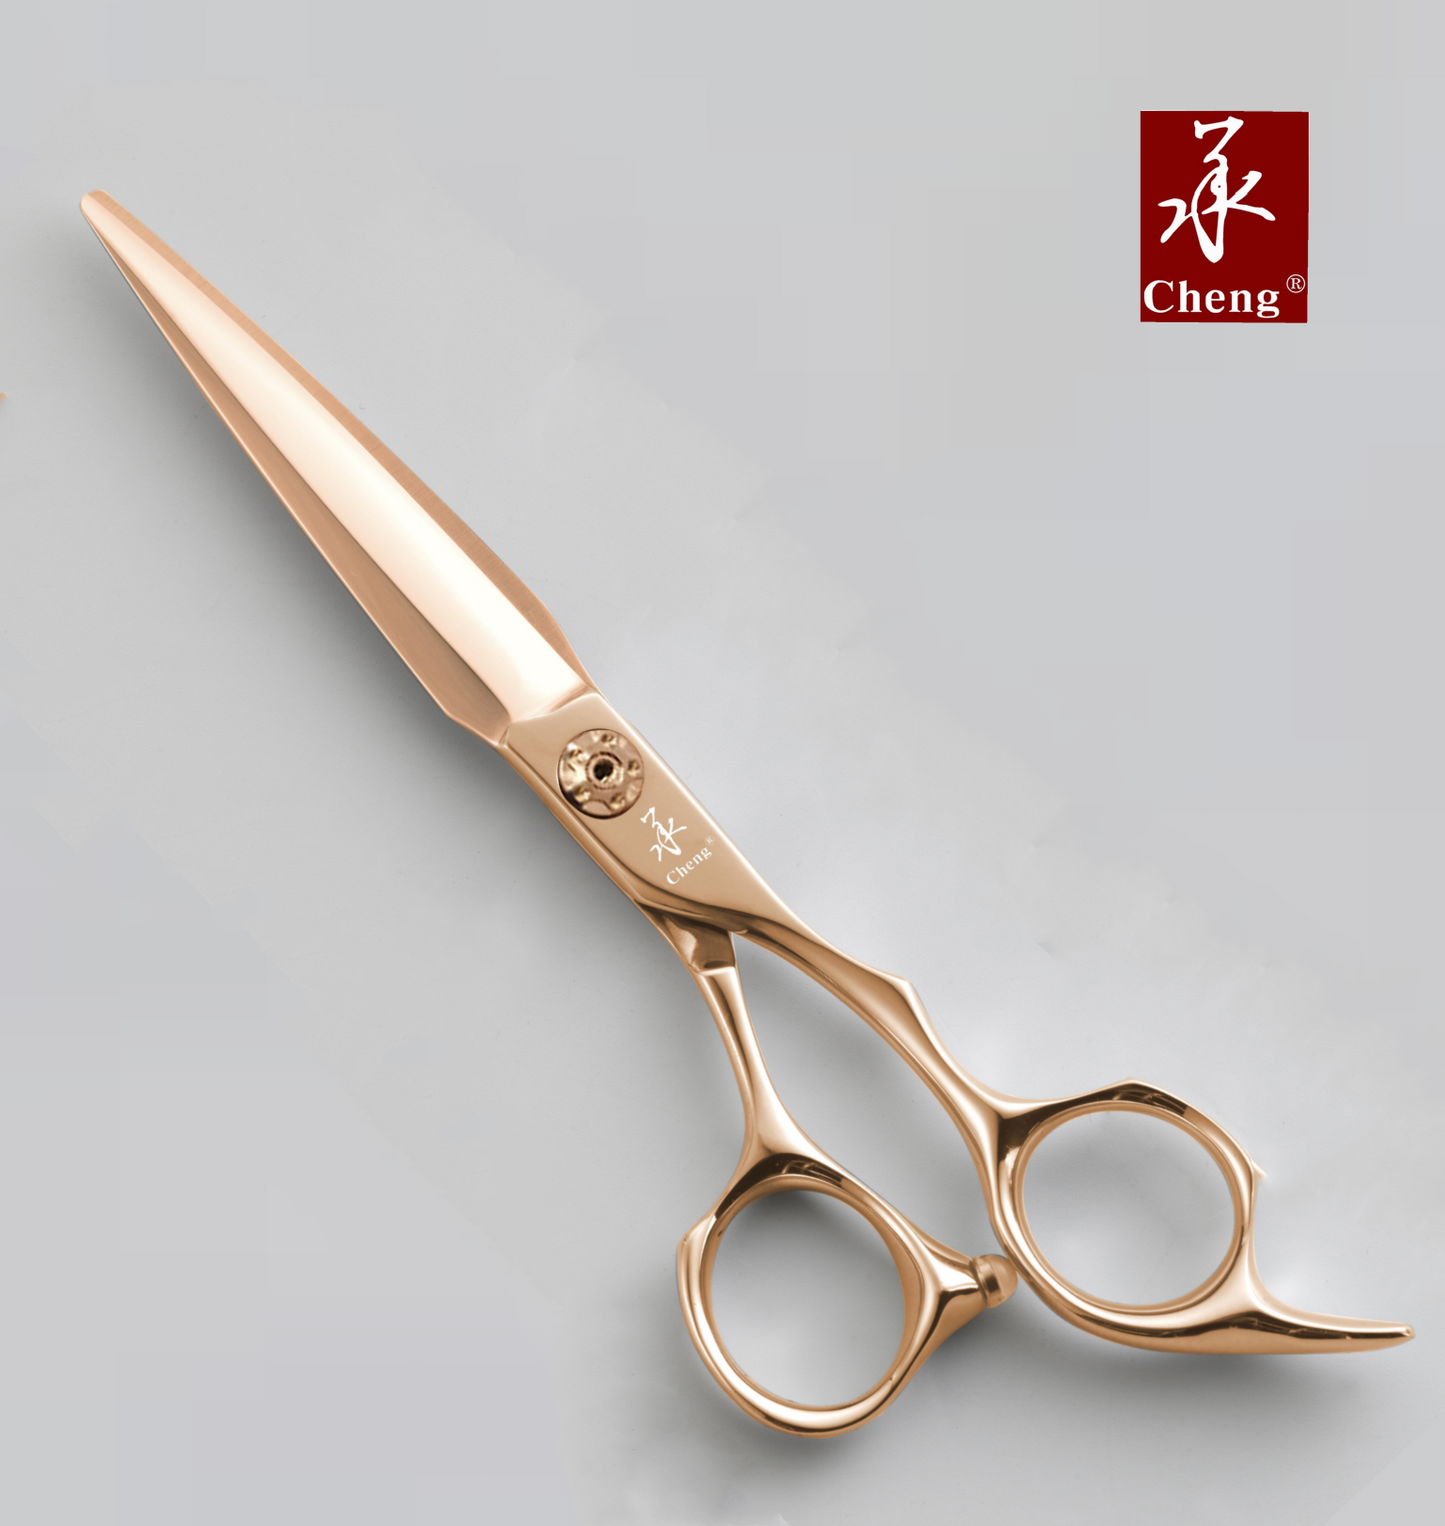 A1-6.3GD Hair Cutting Scissors 6.3 Inch Rose Gold Color